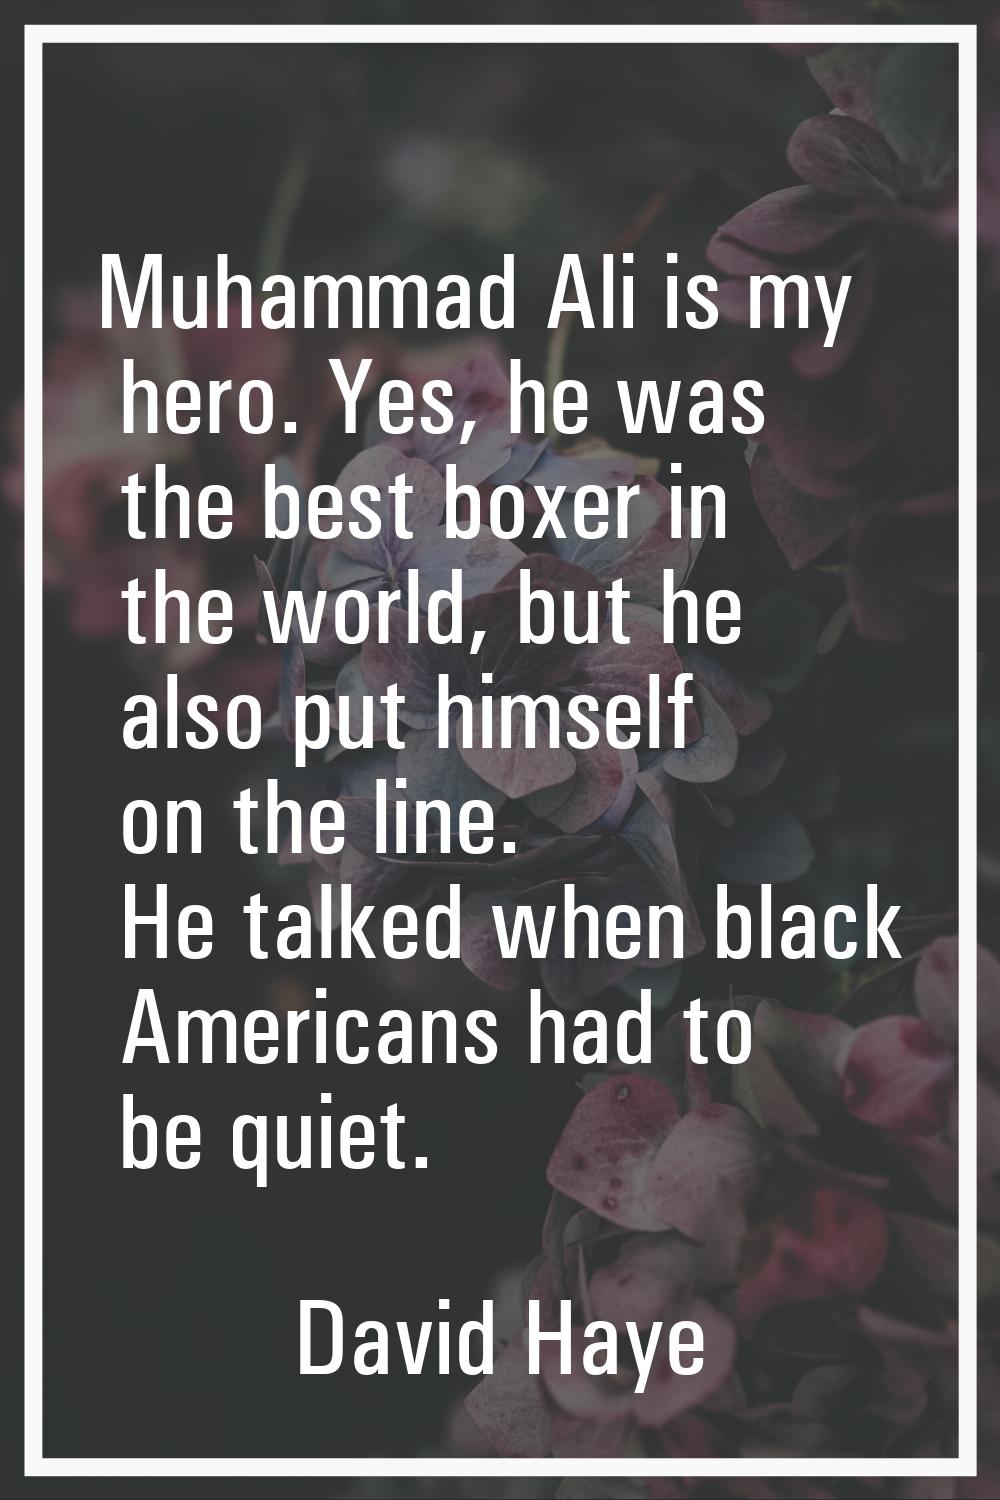 Muhammad Ali is my hero. Yes, he was the best boxer in the world, but he also put himself on the li